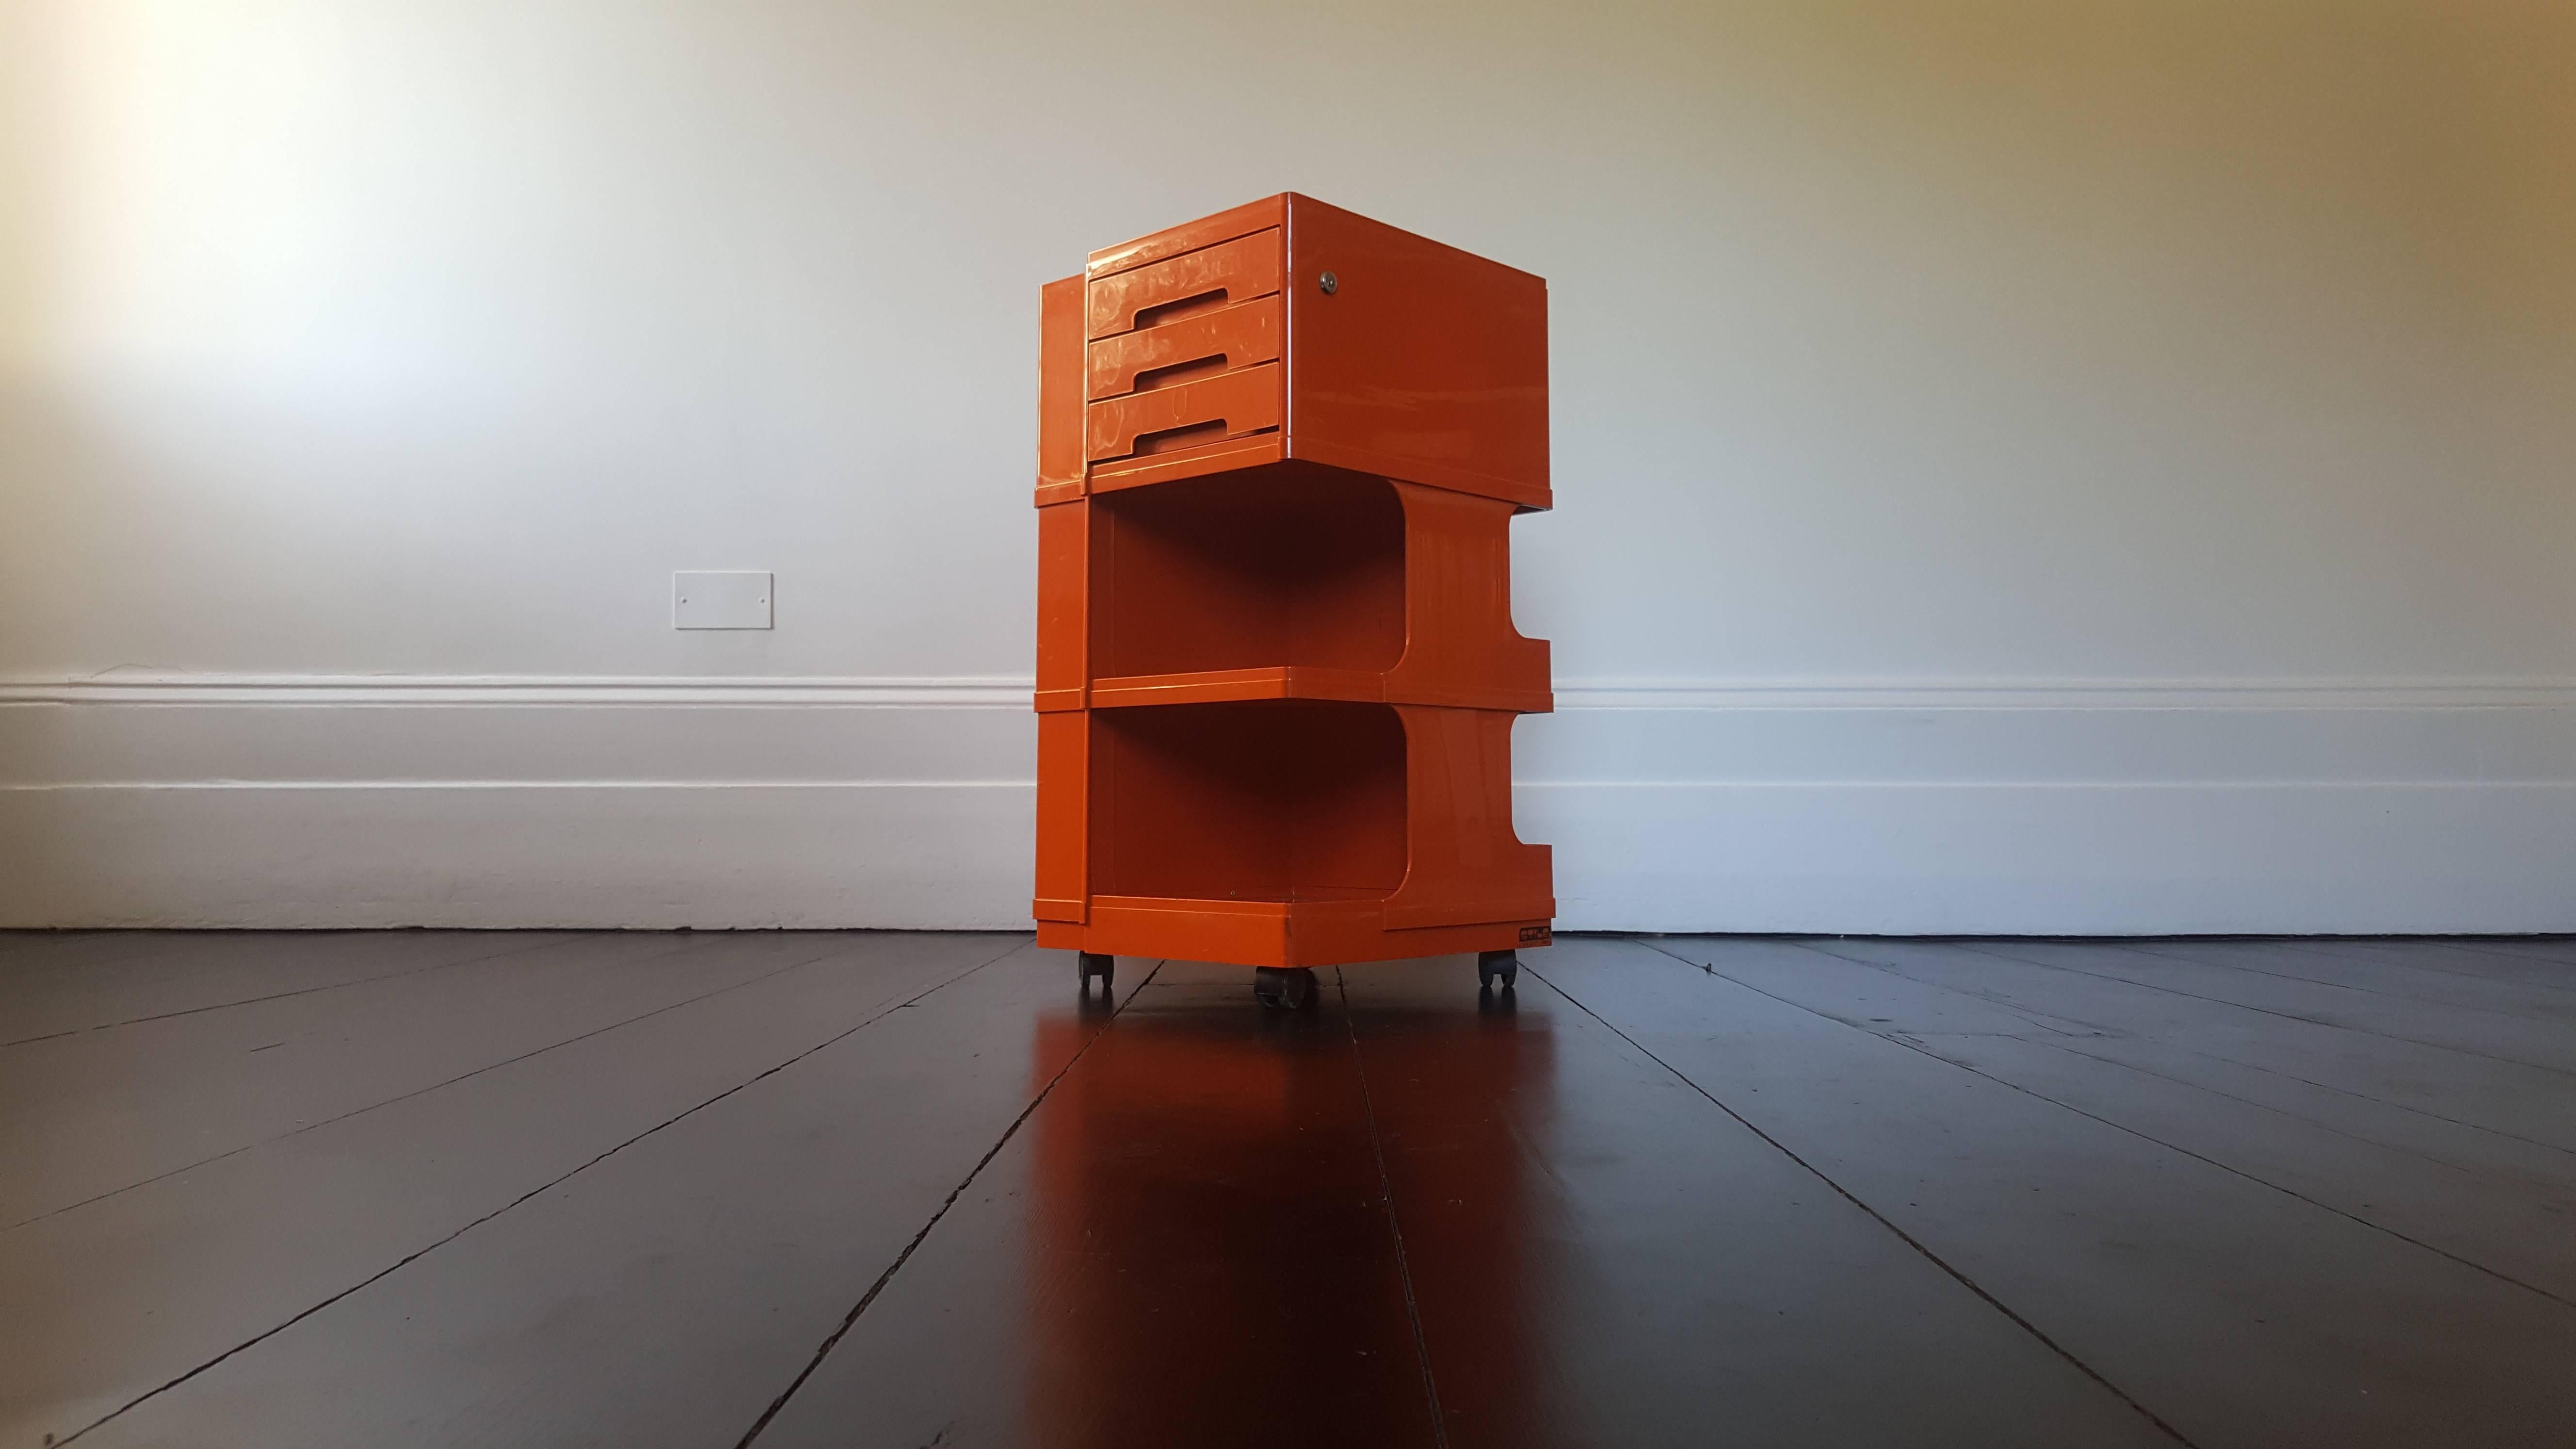 A Mid-Century Italian Giovanni Pelis designed pop-modern orange ABS plastic artist’s work trolley manufactured by Stile Neolt, Italy.

This is the most iconic product of Neolt's history. Designed in 1967 and produced in the 1970s.

  